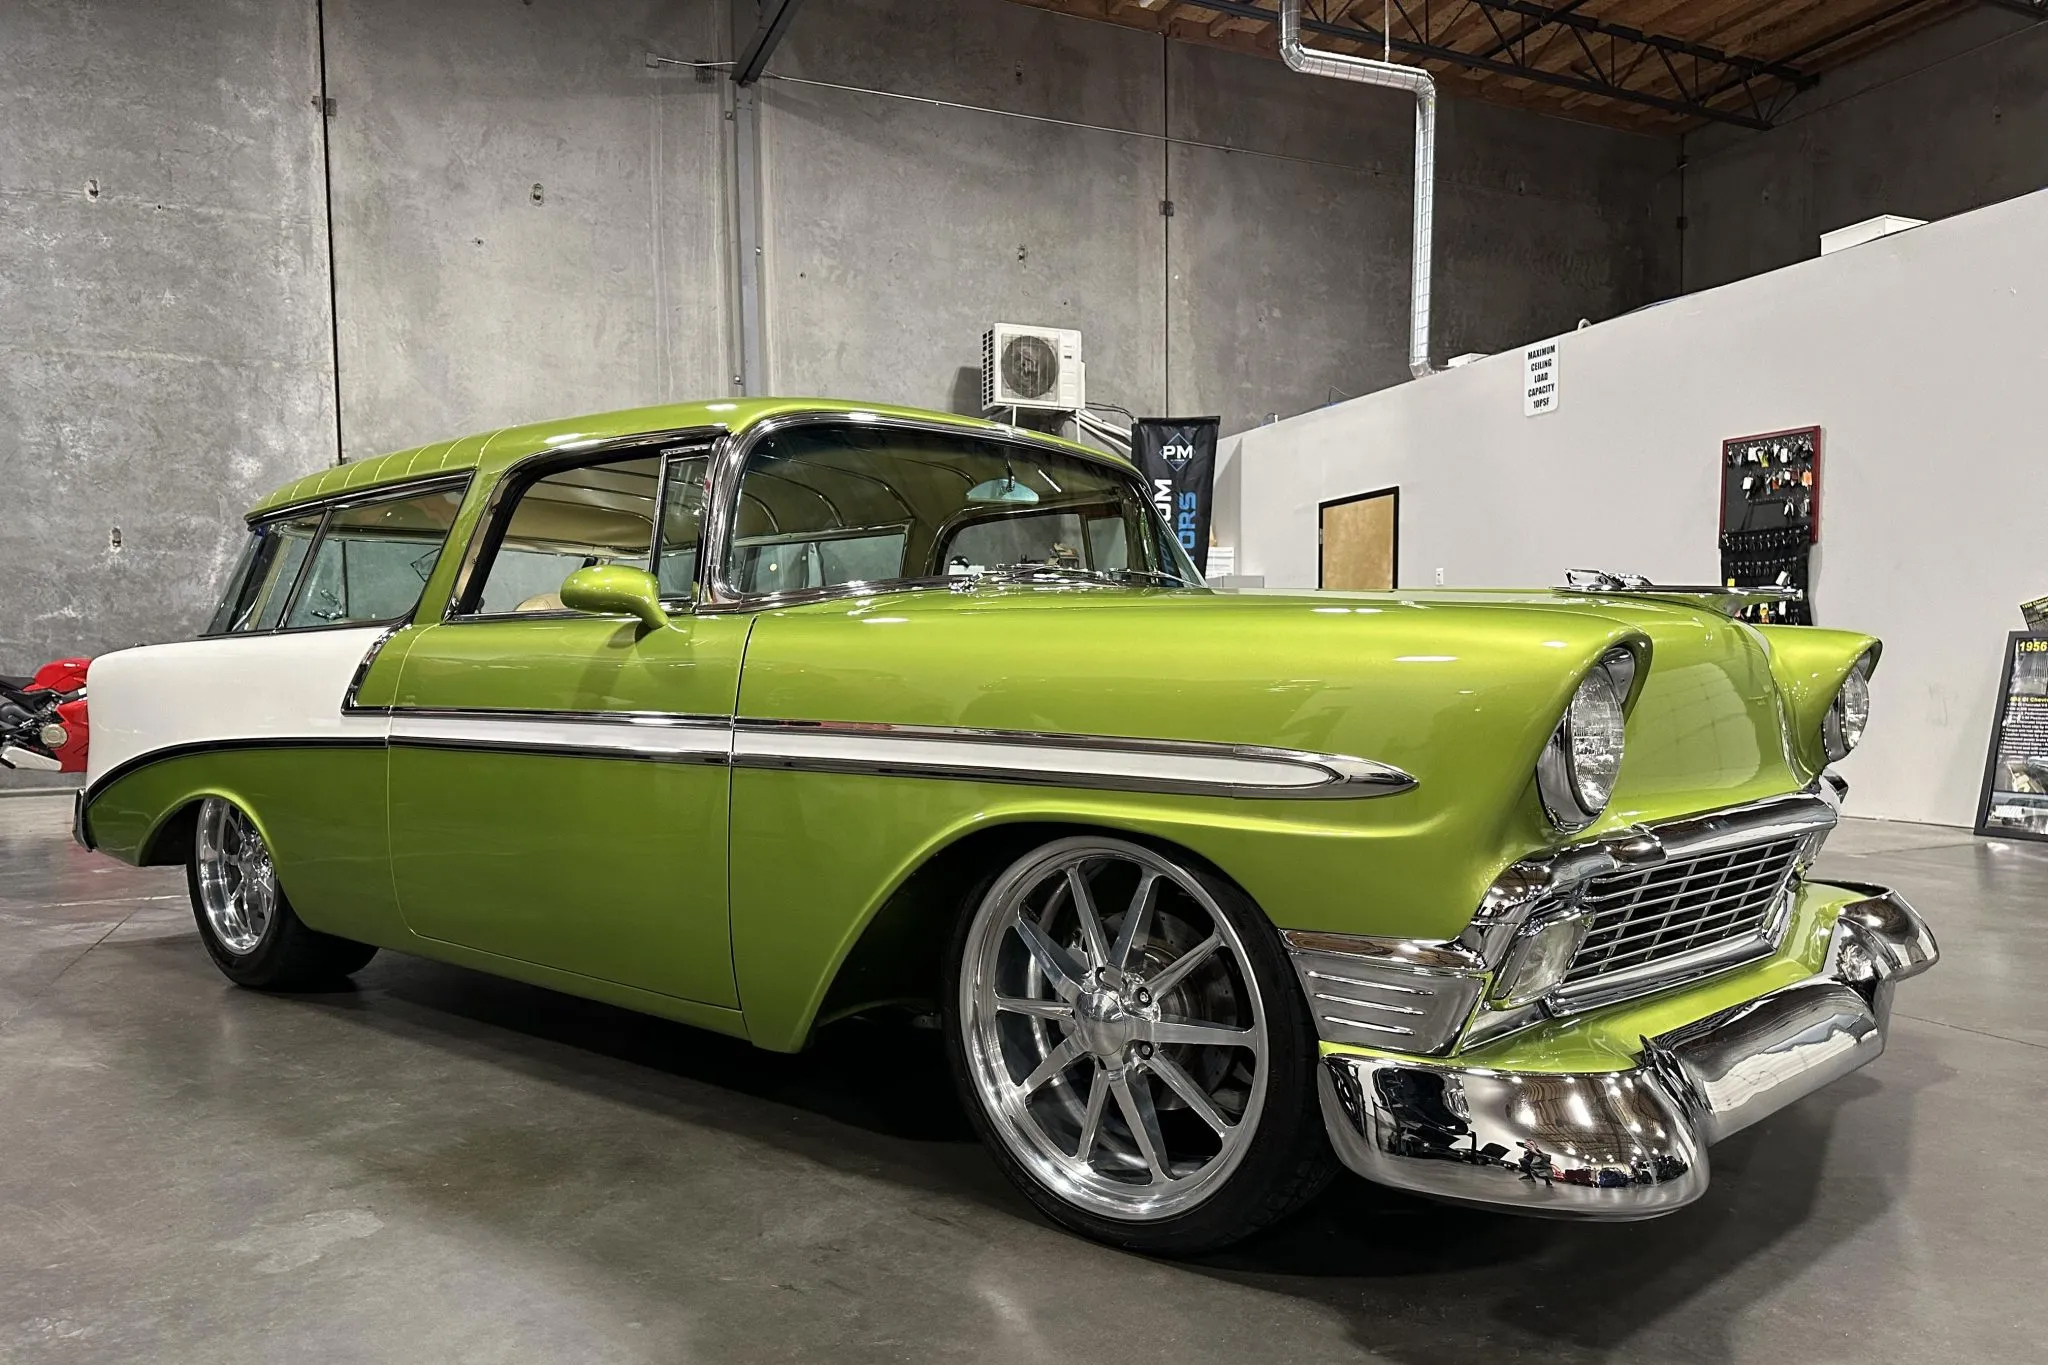 The Classic Elegance of the 1956 Chevrolet Bel Air Nomad Station Wagon